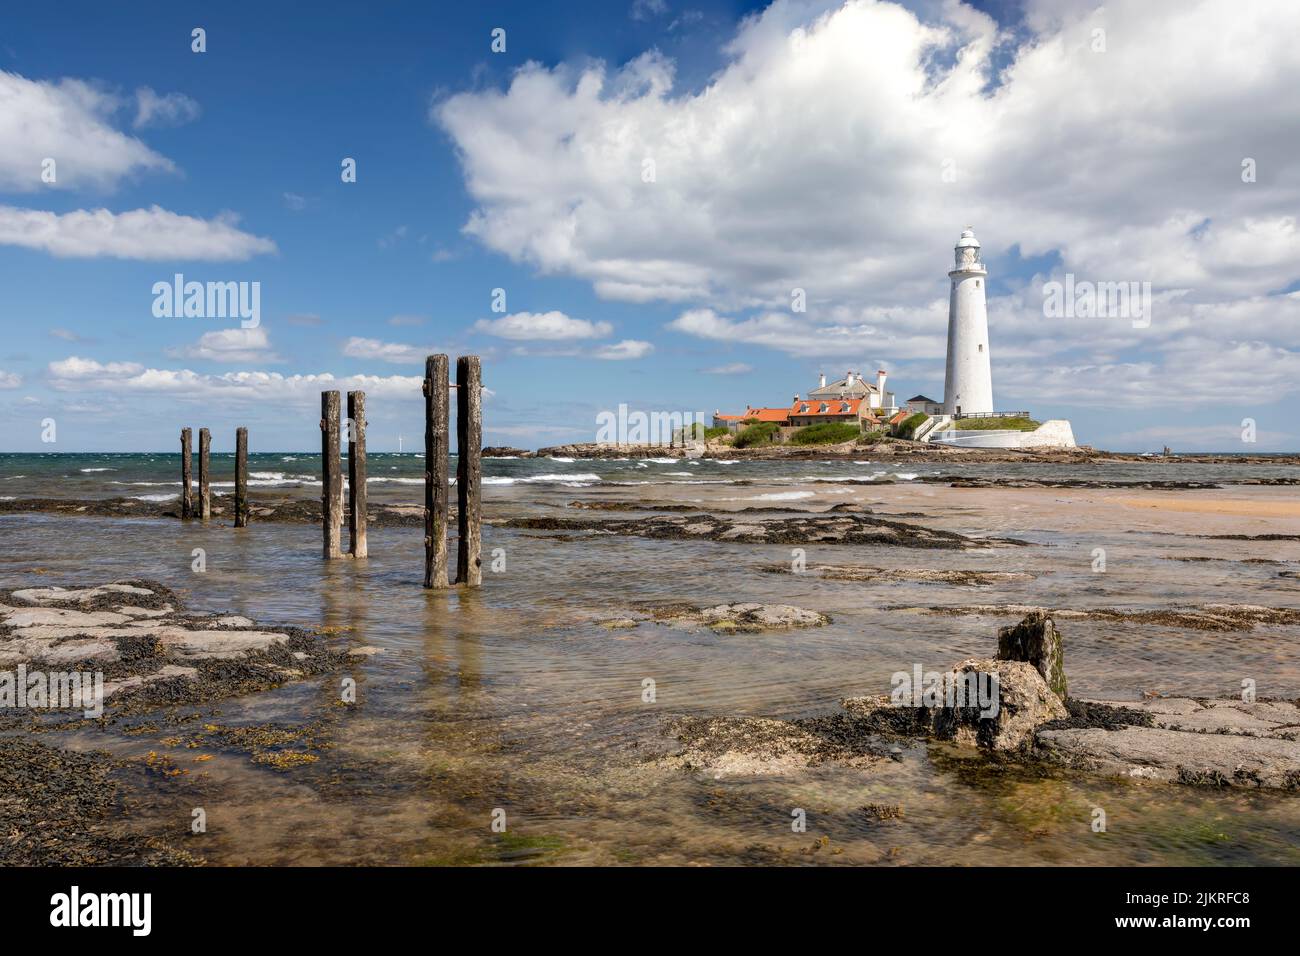 st marys lighthouse near whitley bay approaching high tide daytime no people Stock Photo